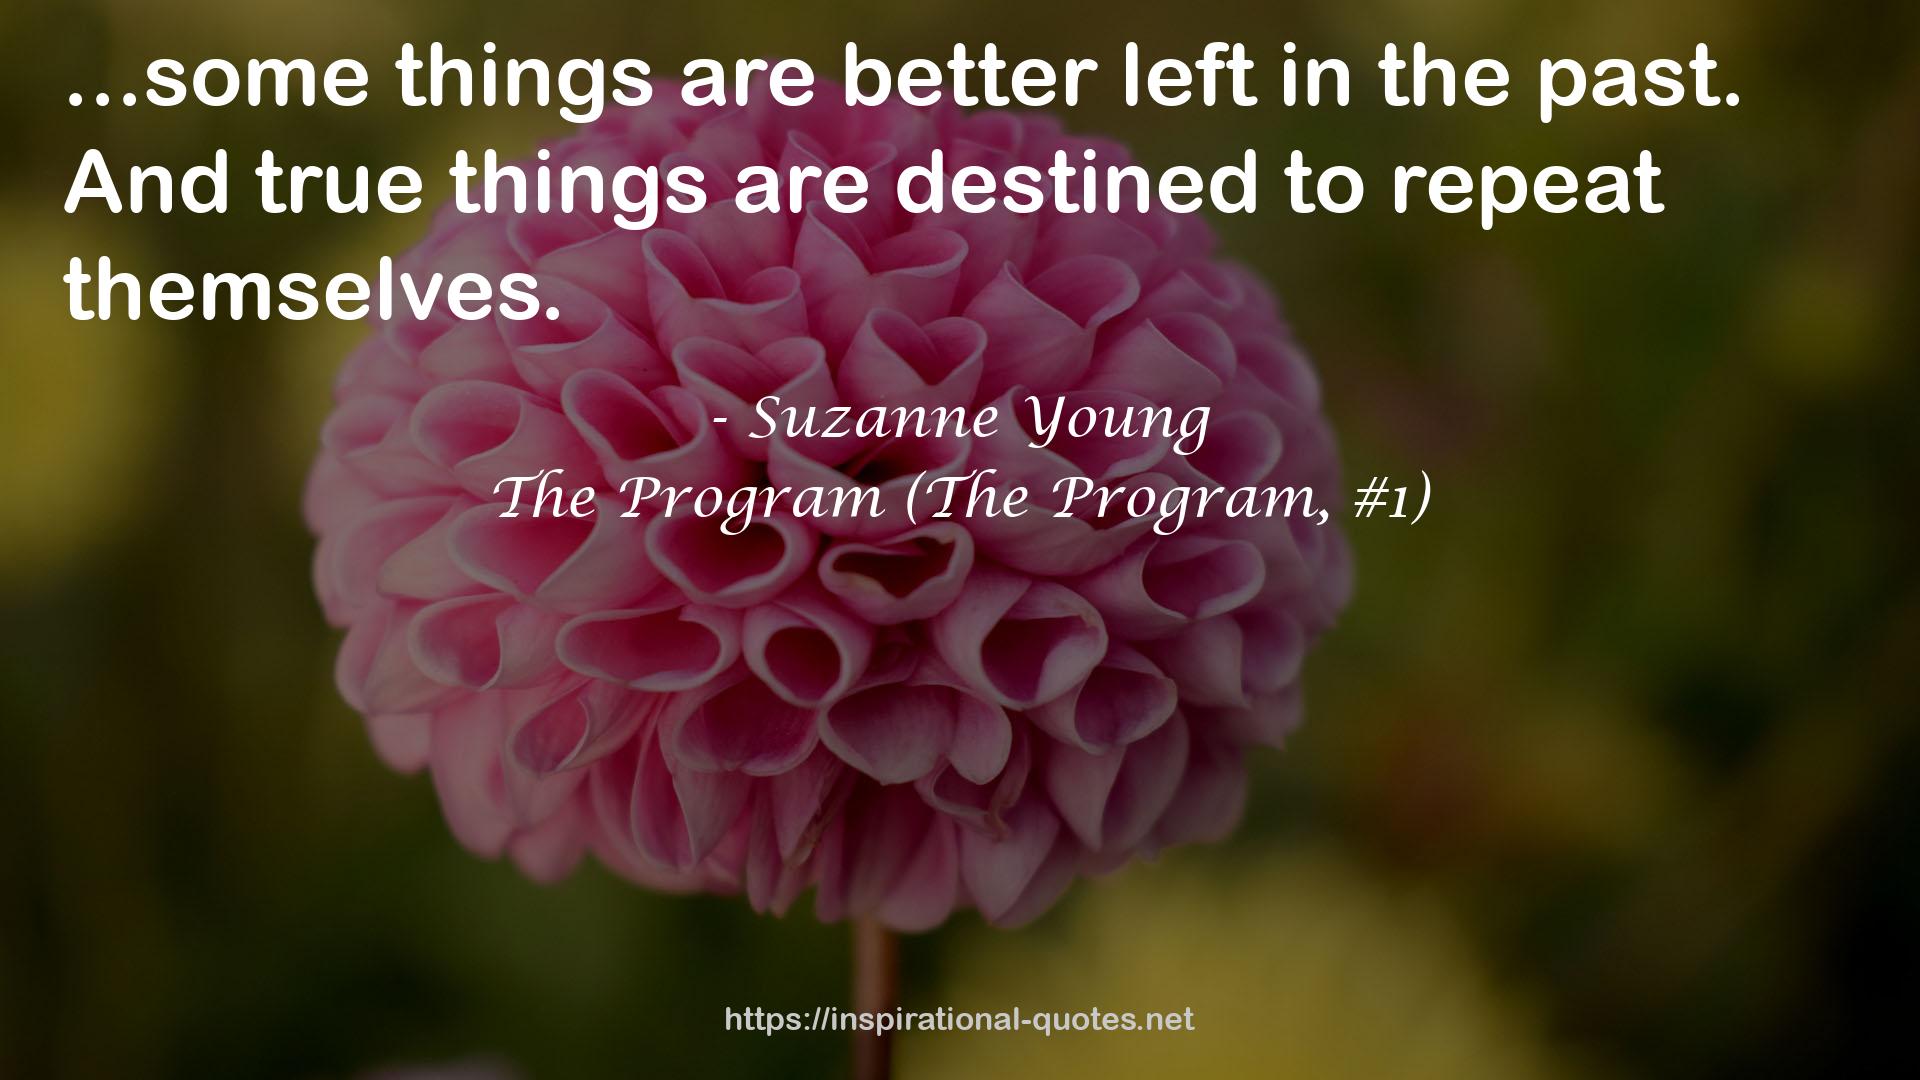 Suzanne Young QUOTES